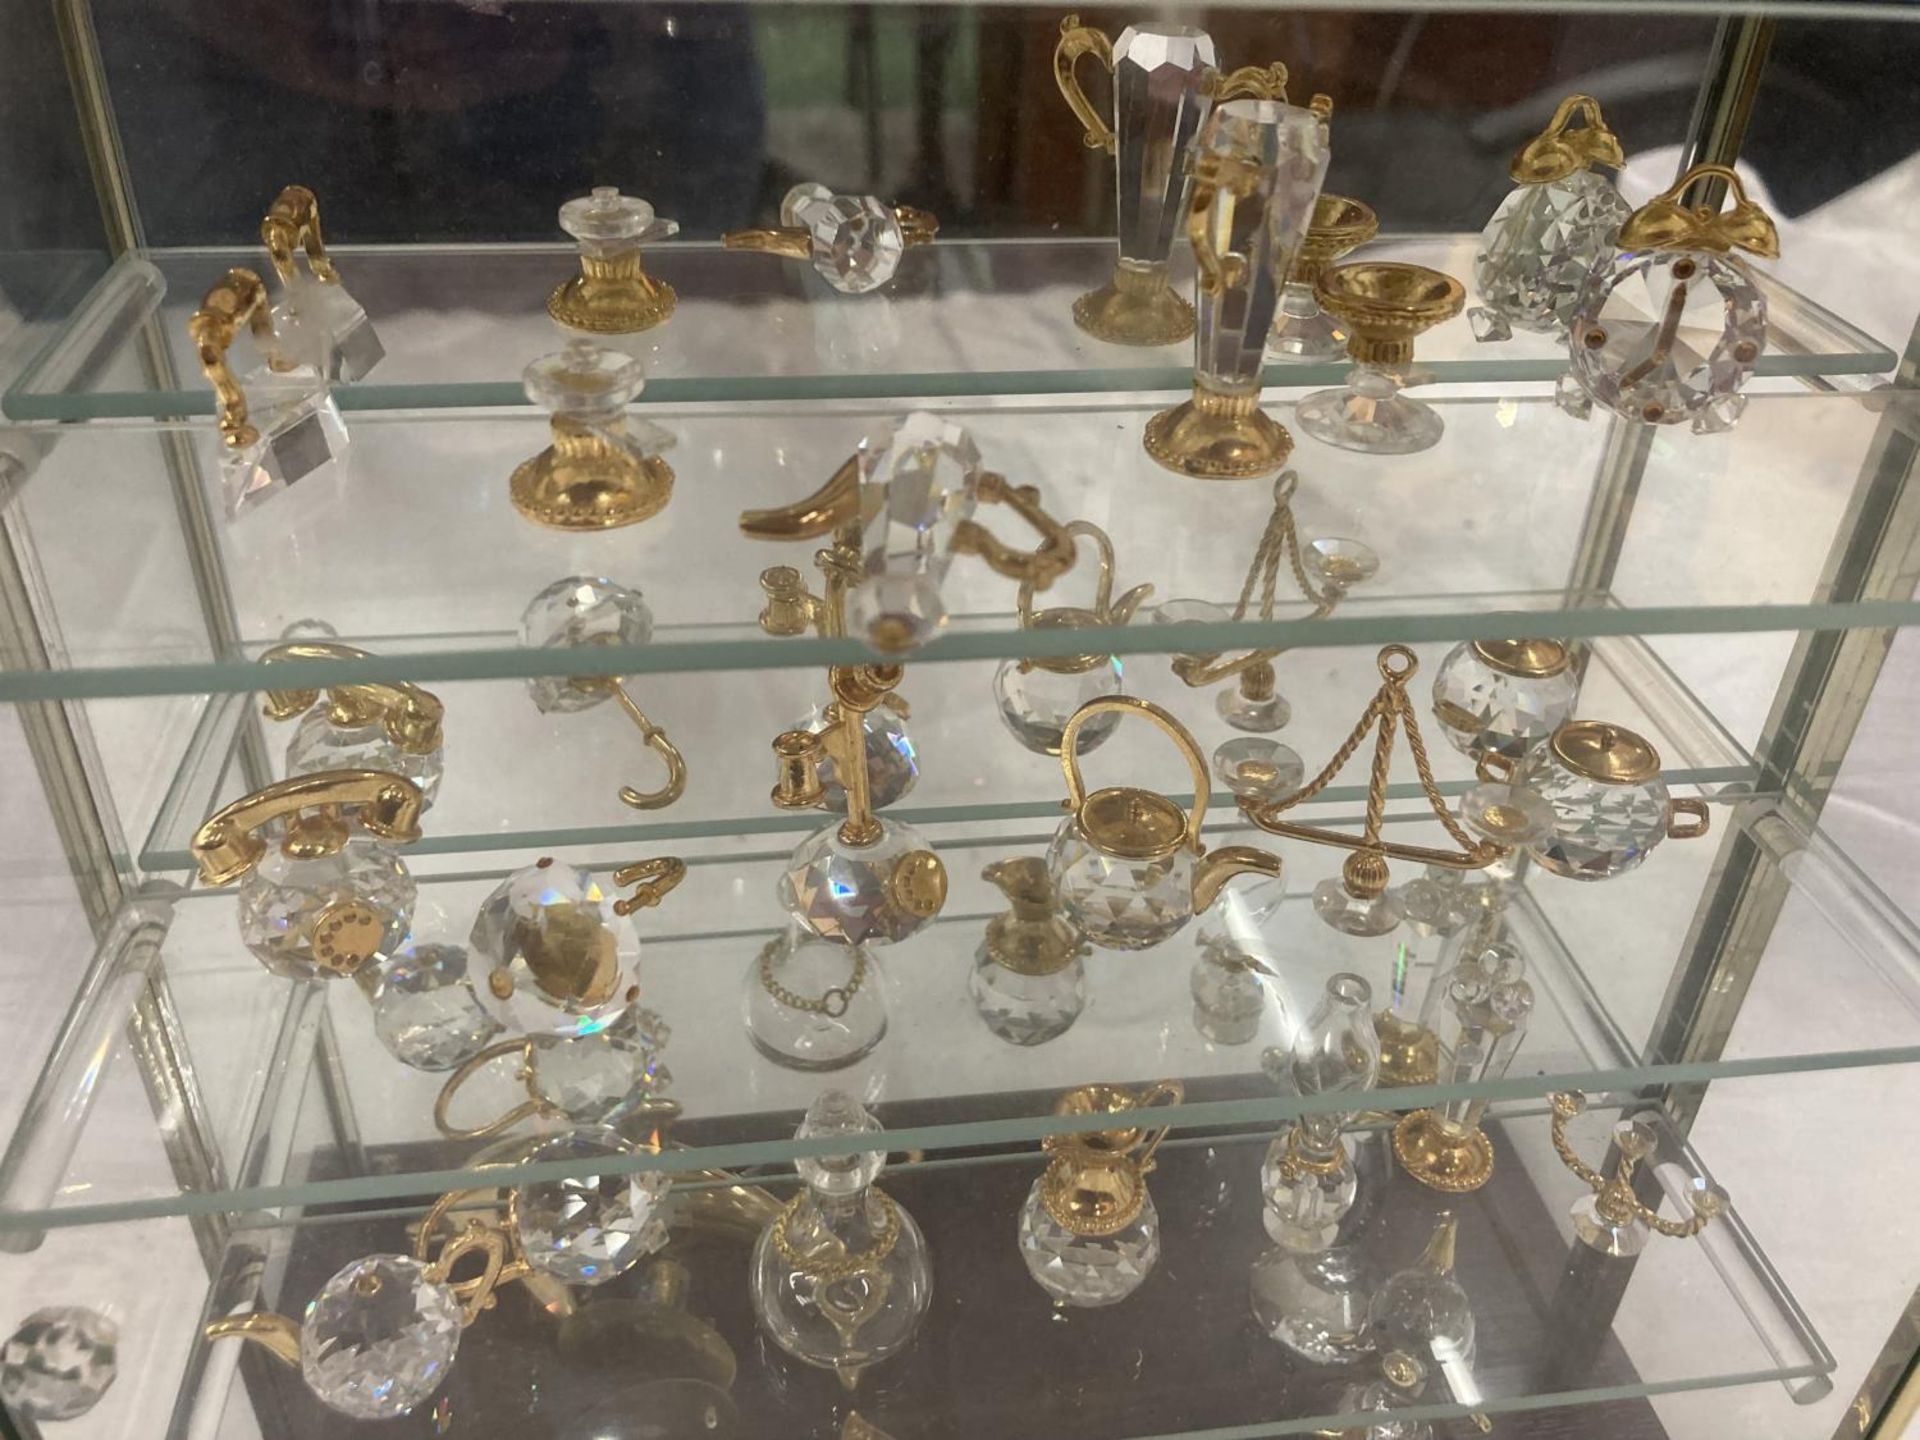 TWENTY PIECES OF SWAROSKI CRYSTAL IN A GLASS DISPLAY CASE - Image 5 of 5